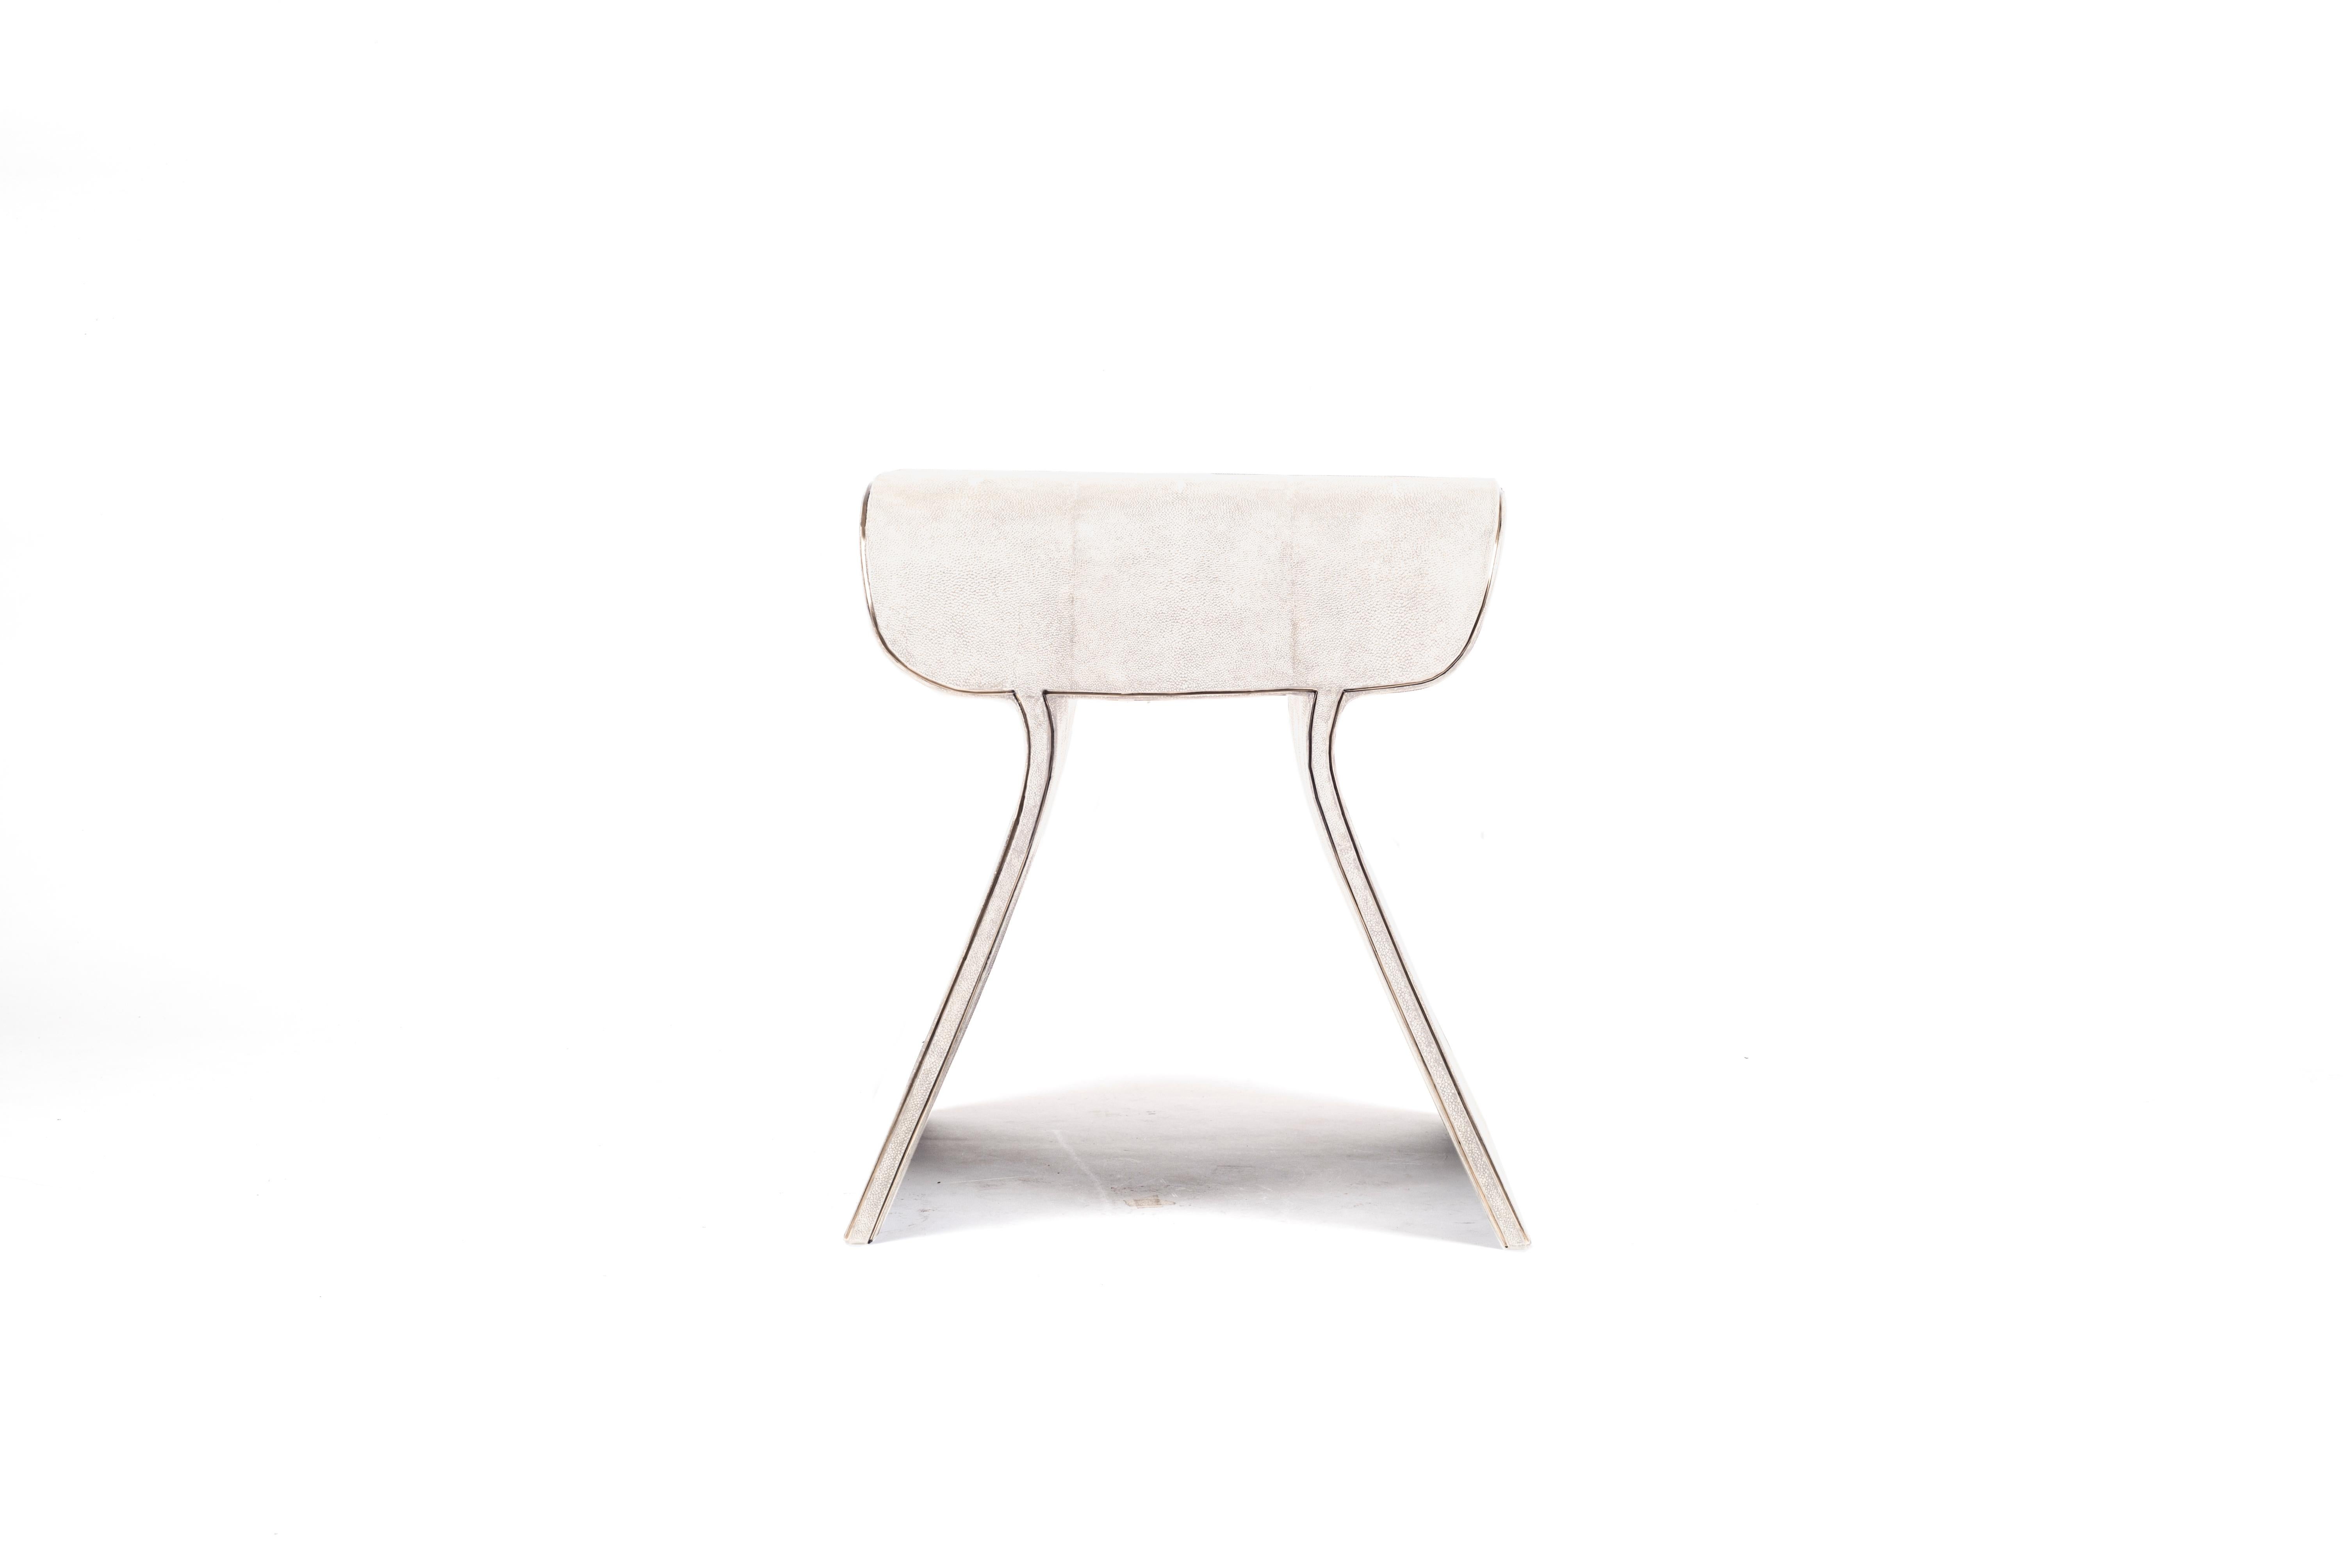 Contemporary Dandy Stool in Cream Shagreen and Bronze-Patina Brass by Kifu, Paris For Sale